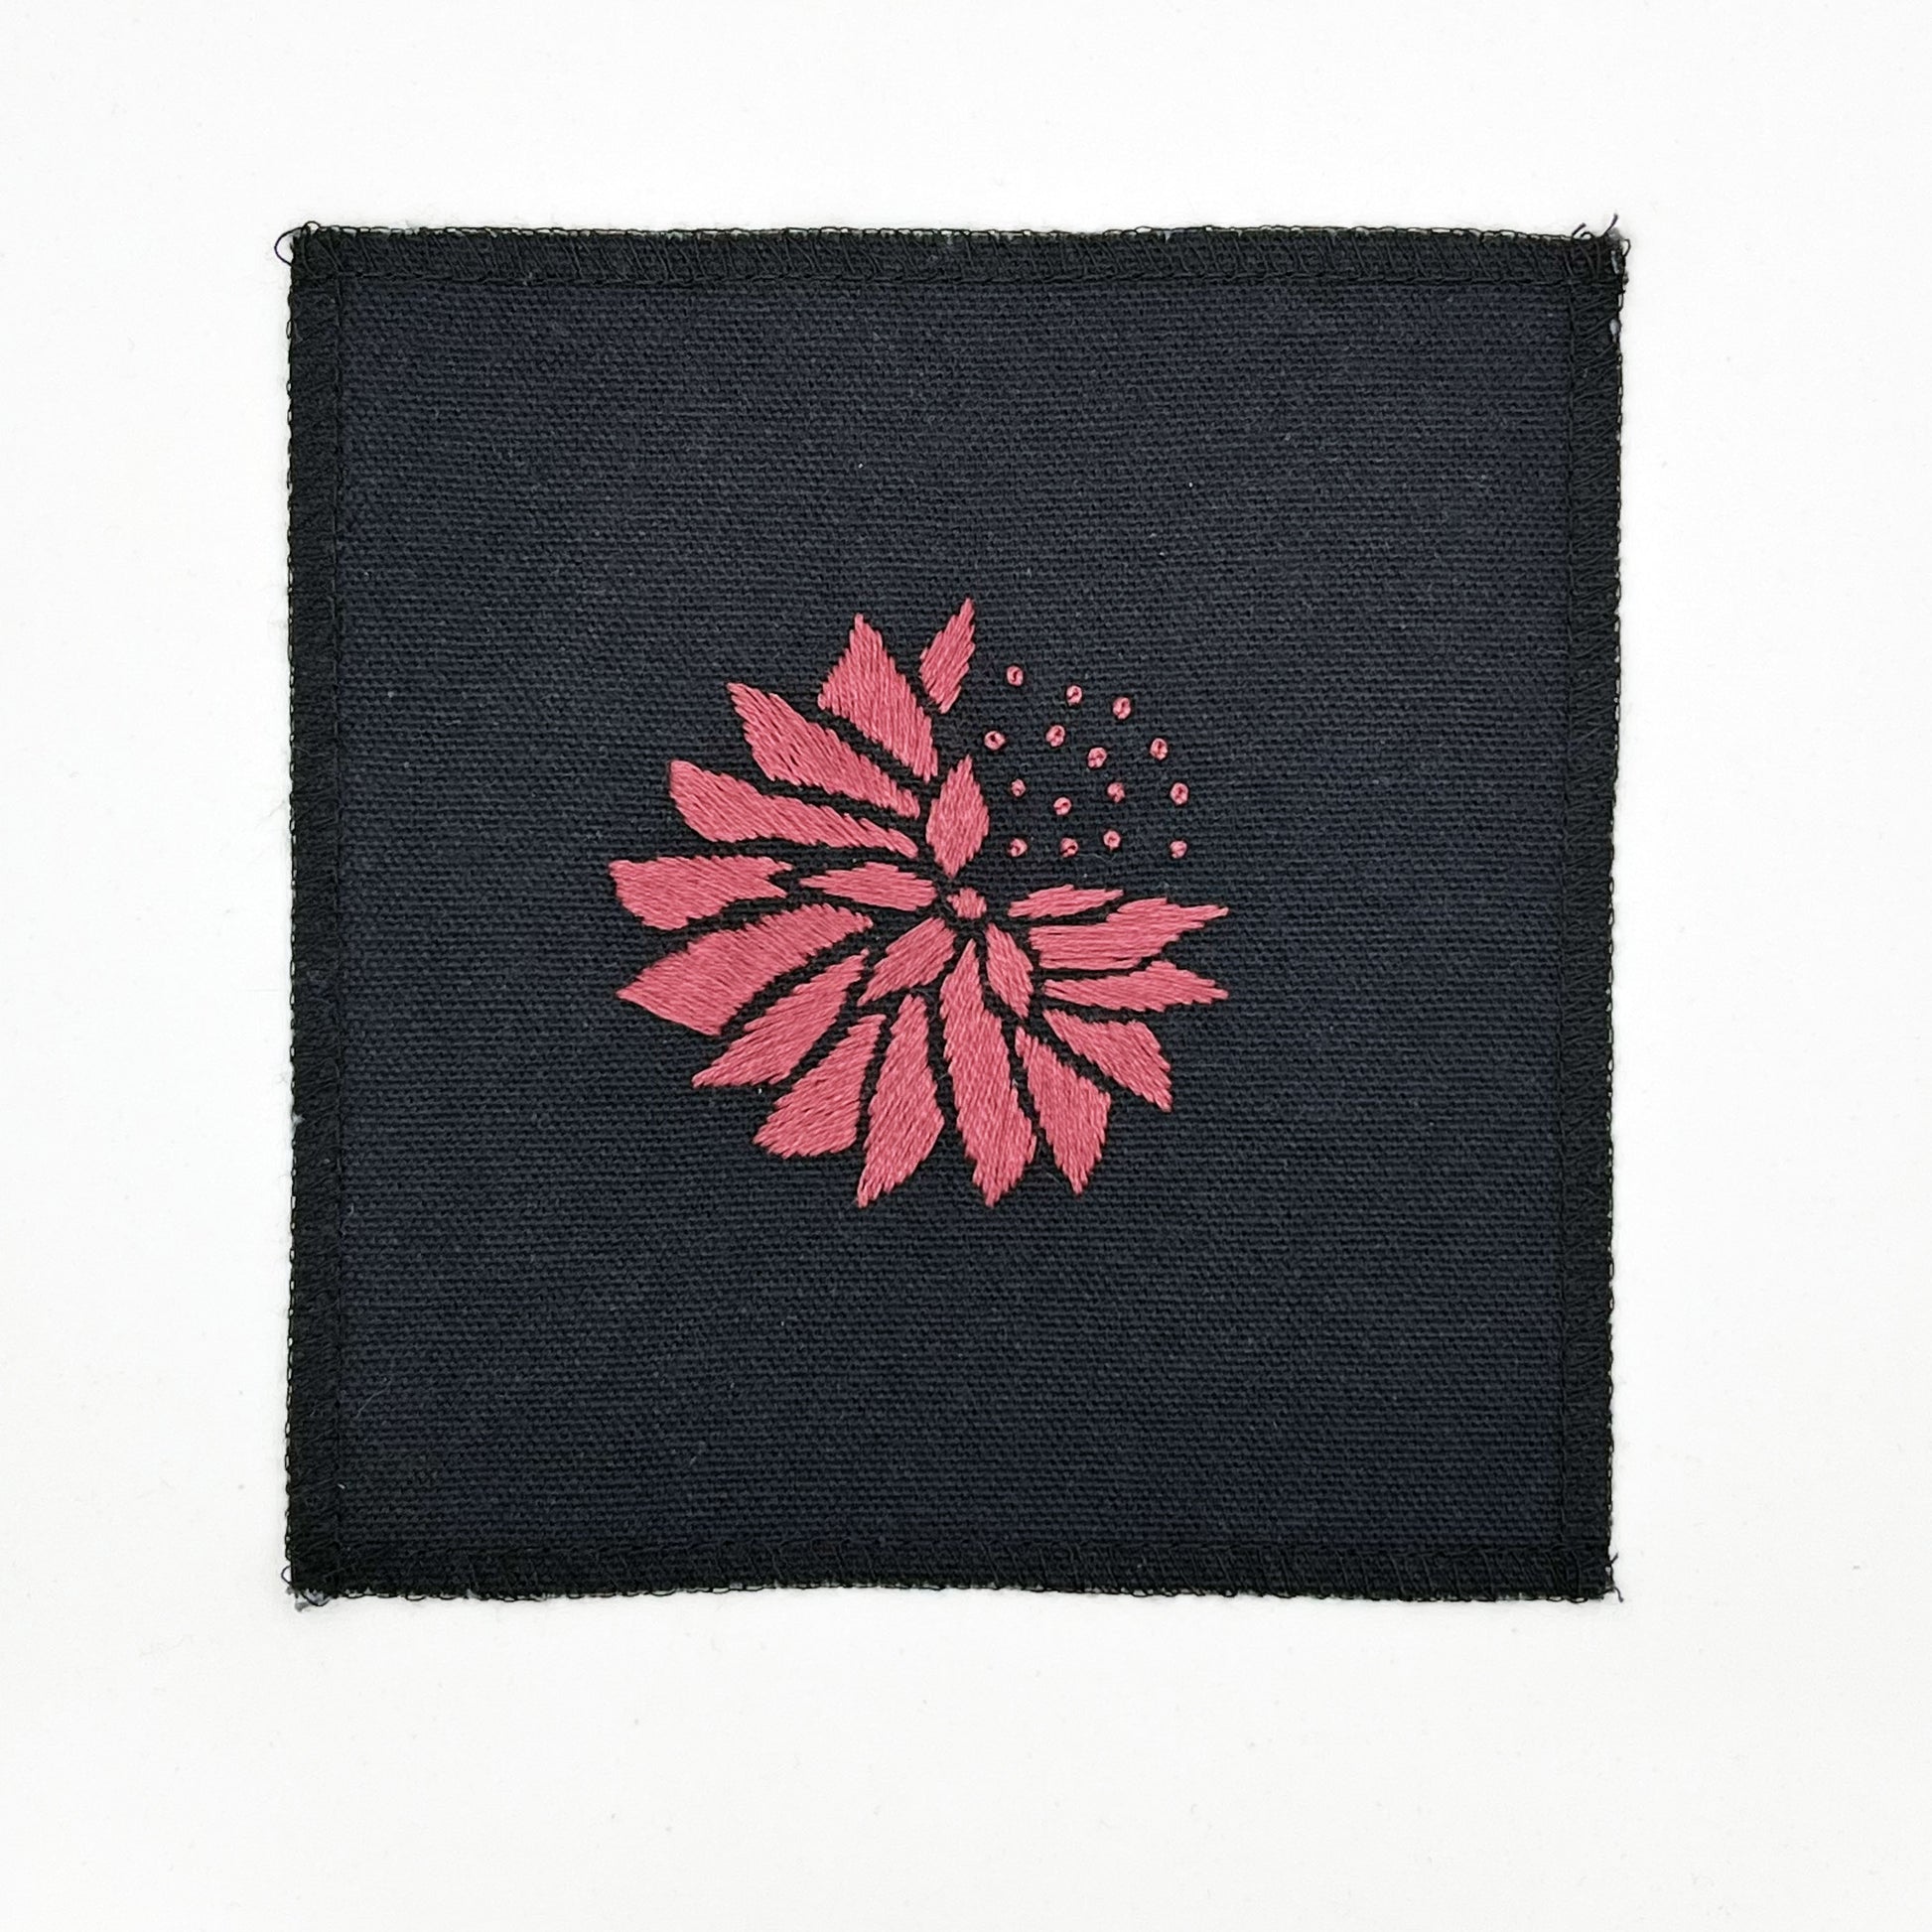 a square patch in black fabric, hand embroidered with a plum colored abstract dandelion made mostly of petals, with a quarter of them replaced with french knots, with overlocked edges, on a white background